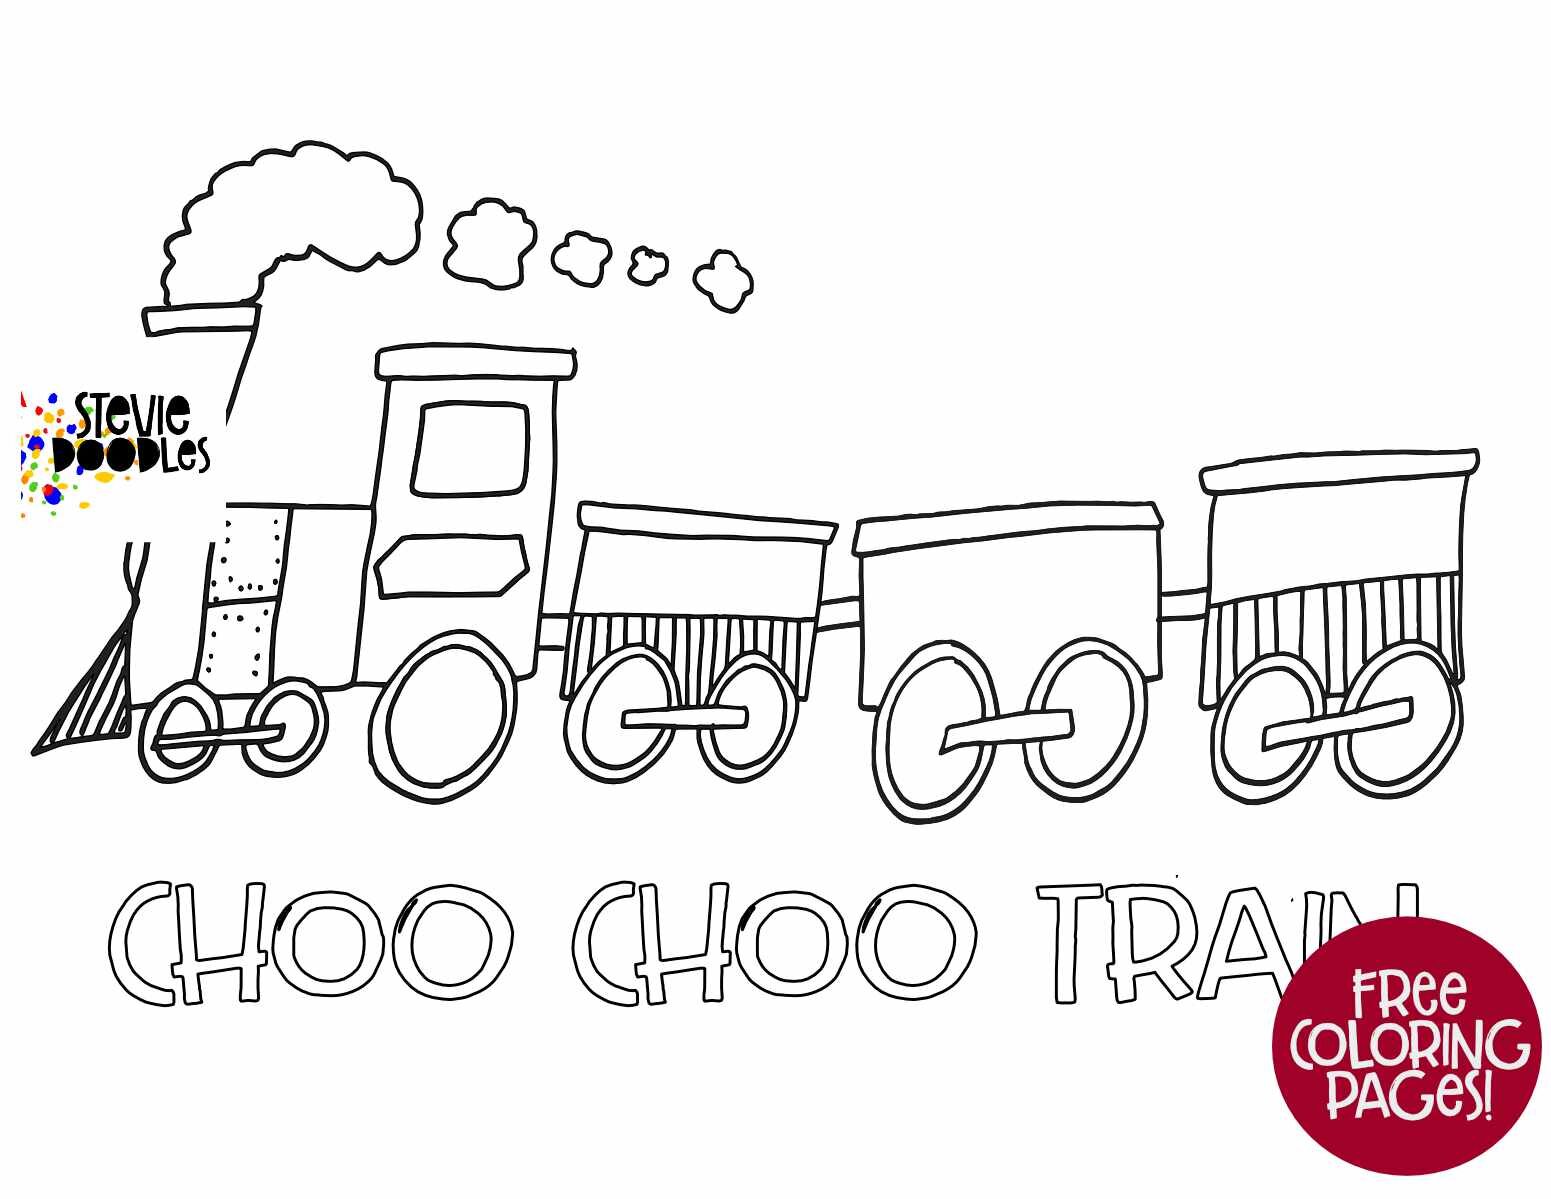 Free printable train page for little hands